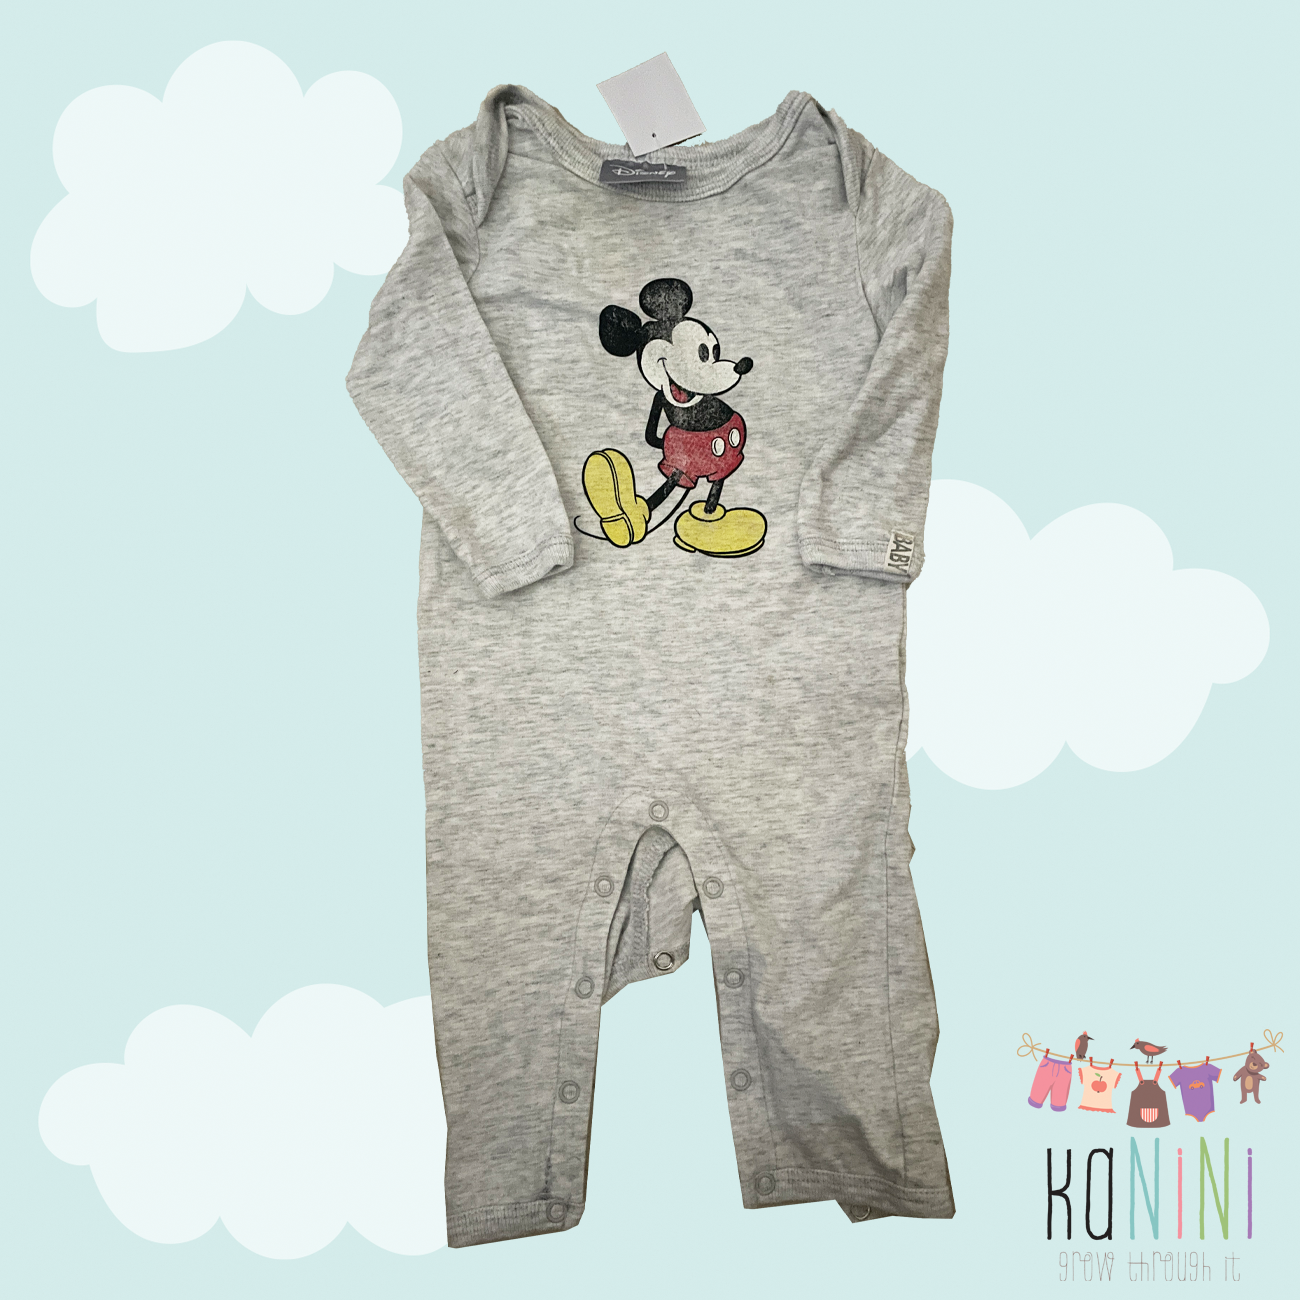 Featured image for “Cotton On 0 - 3 Months Boys Mickey Mouse Babygrow”